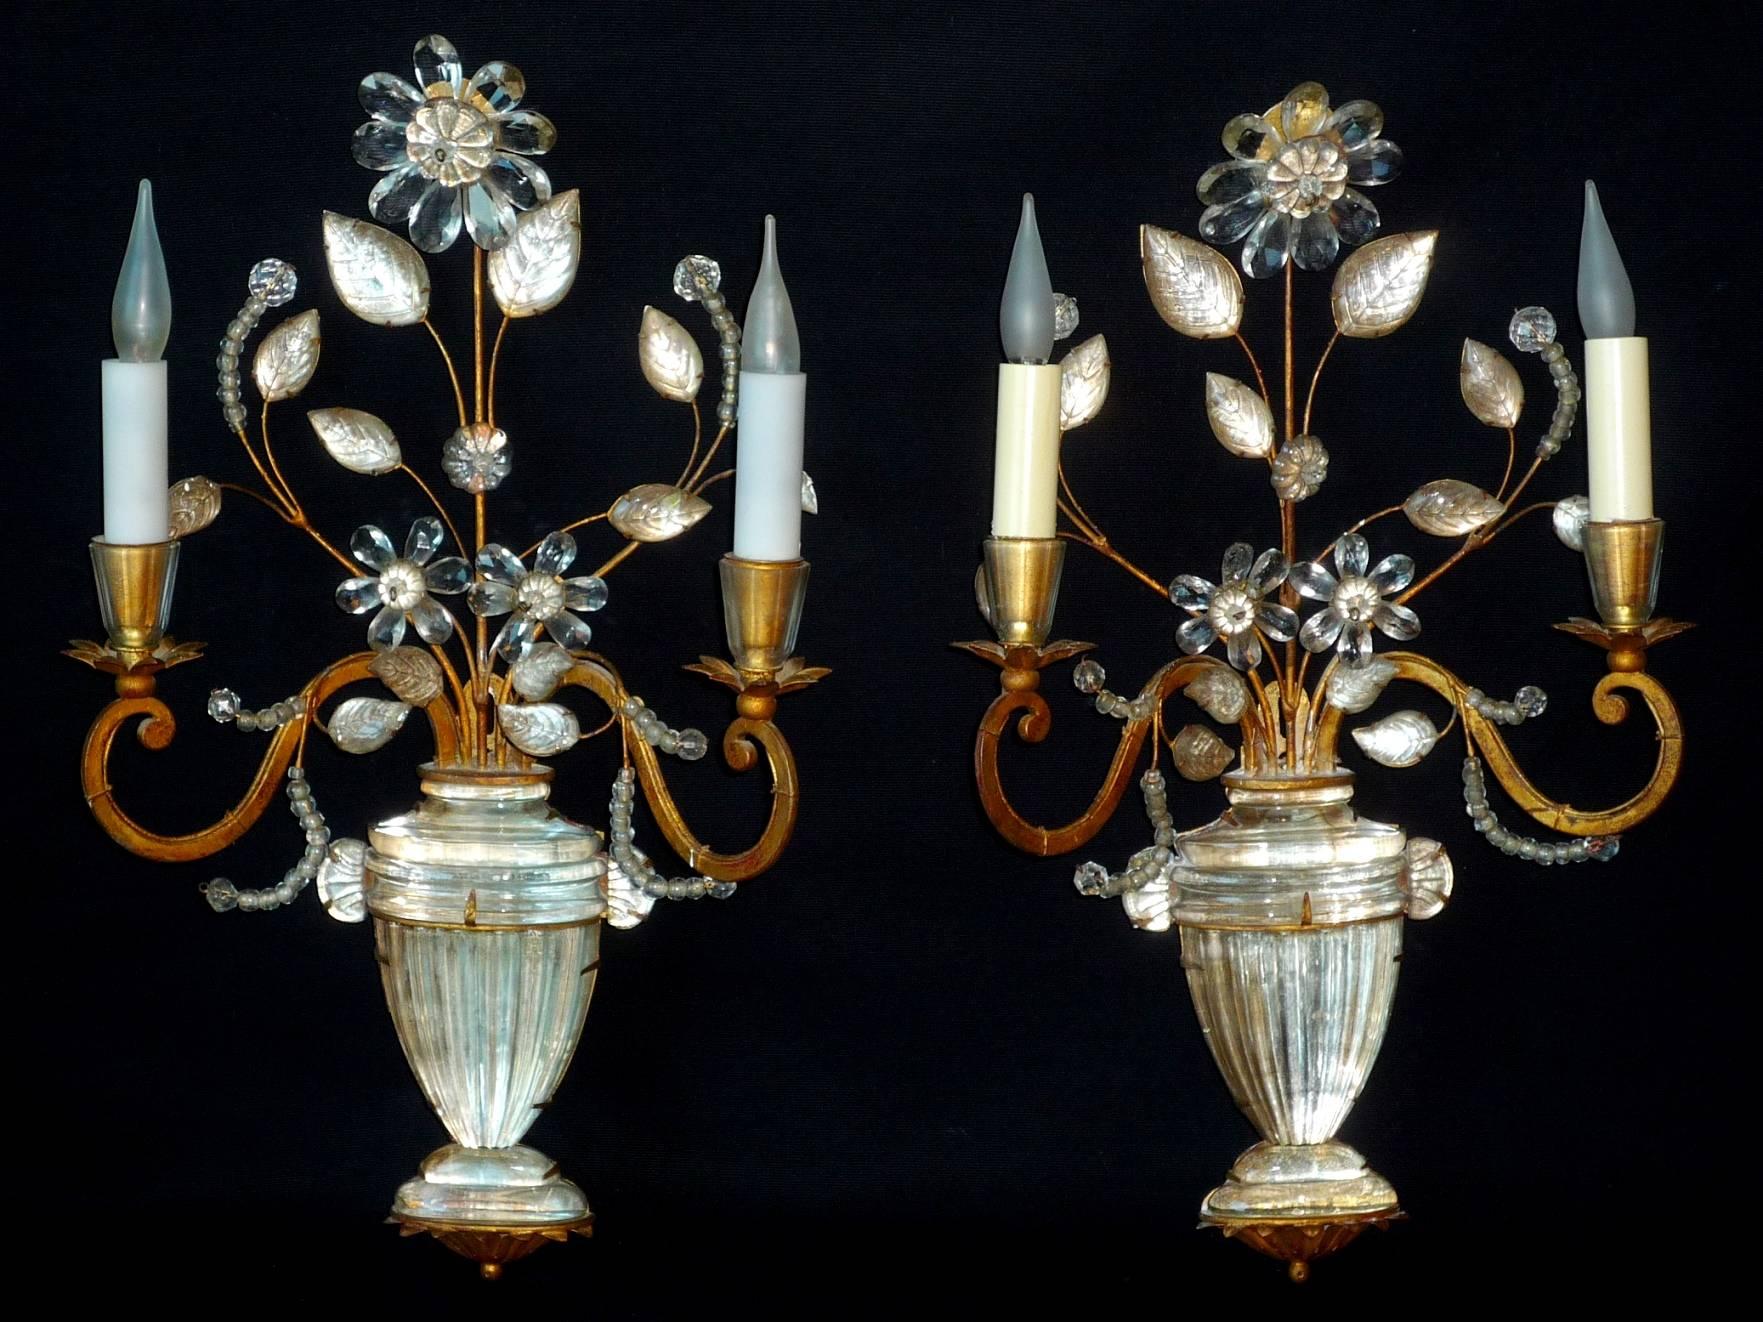 Early 20th Century Pair of French Gilt Iron and Crystal Sconces, Maison Baguès, circa 1925